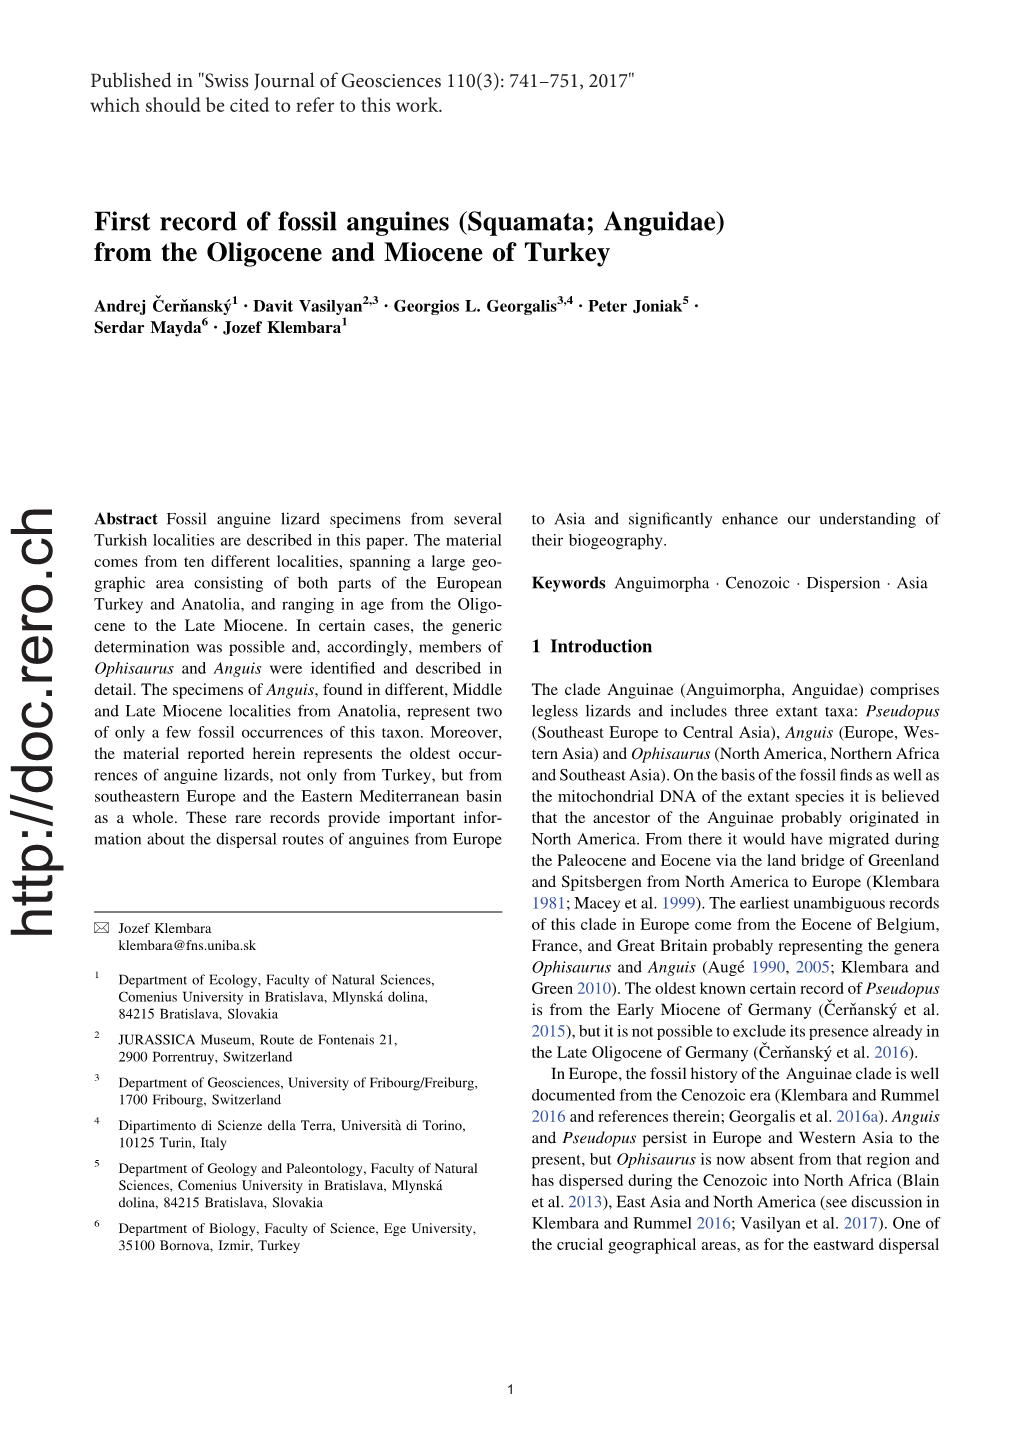 First Record of Fossil Anguines (Squamata; Anguidae) from the Oligocene and Miocene of Turkey